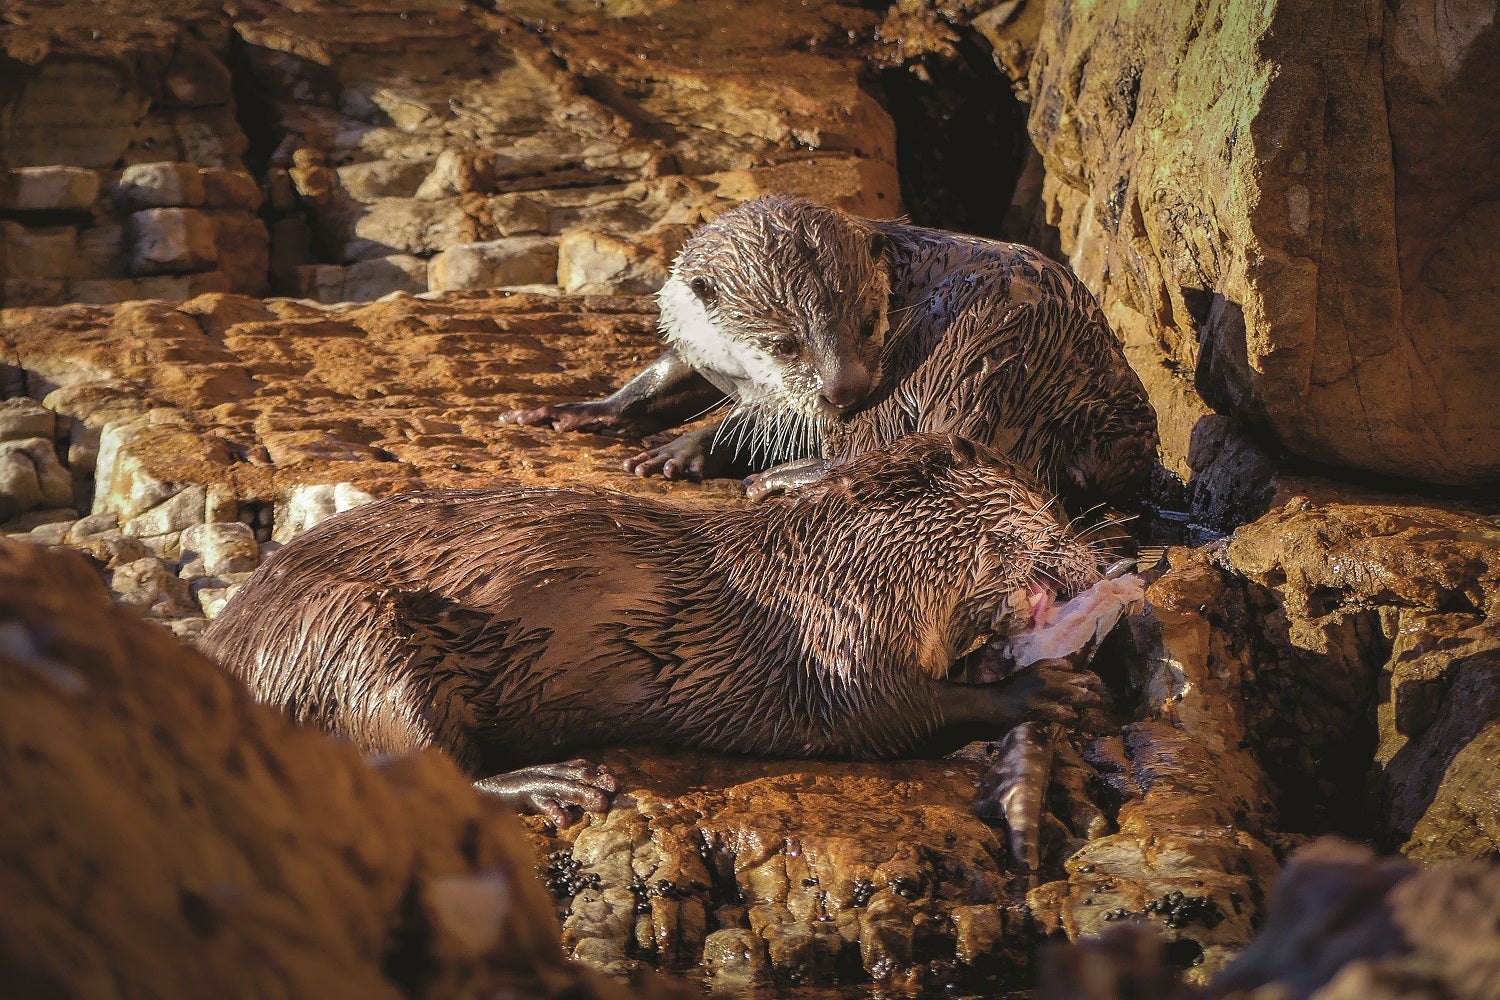 Cape clawless otters